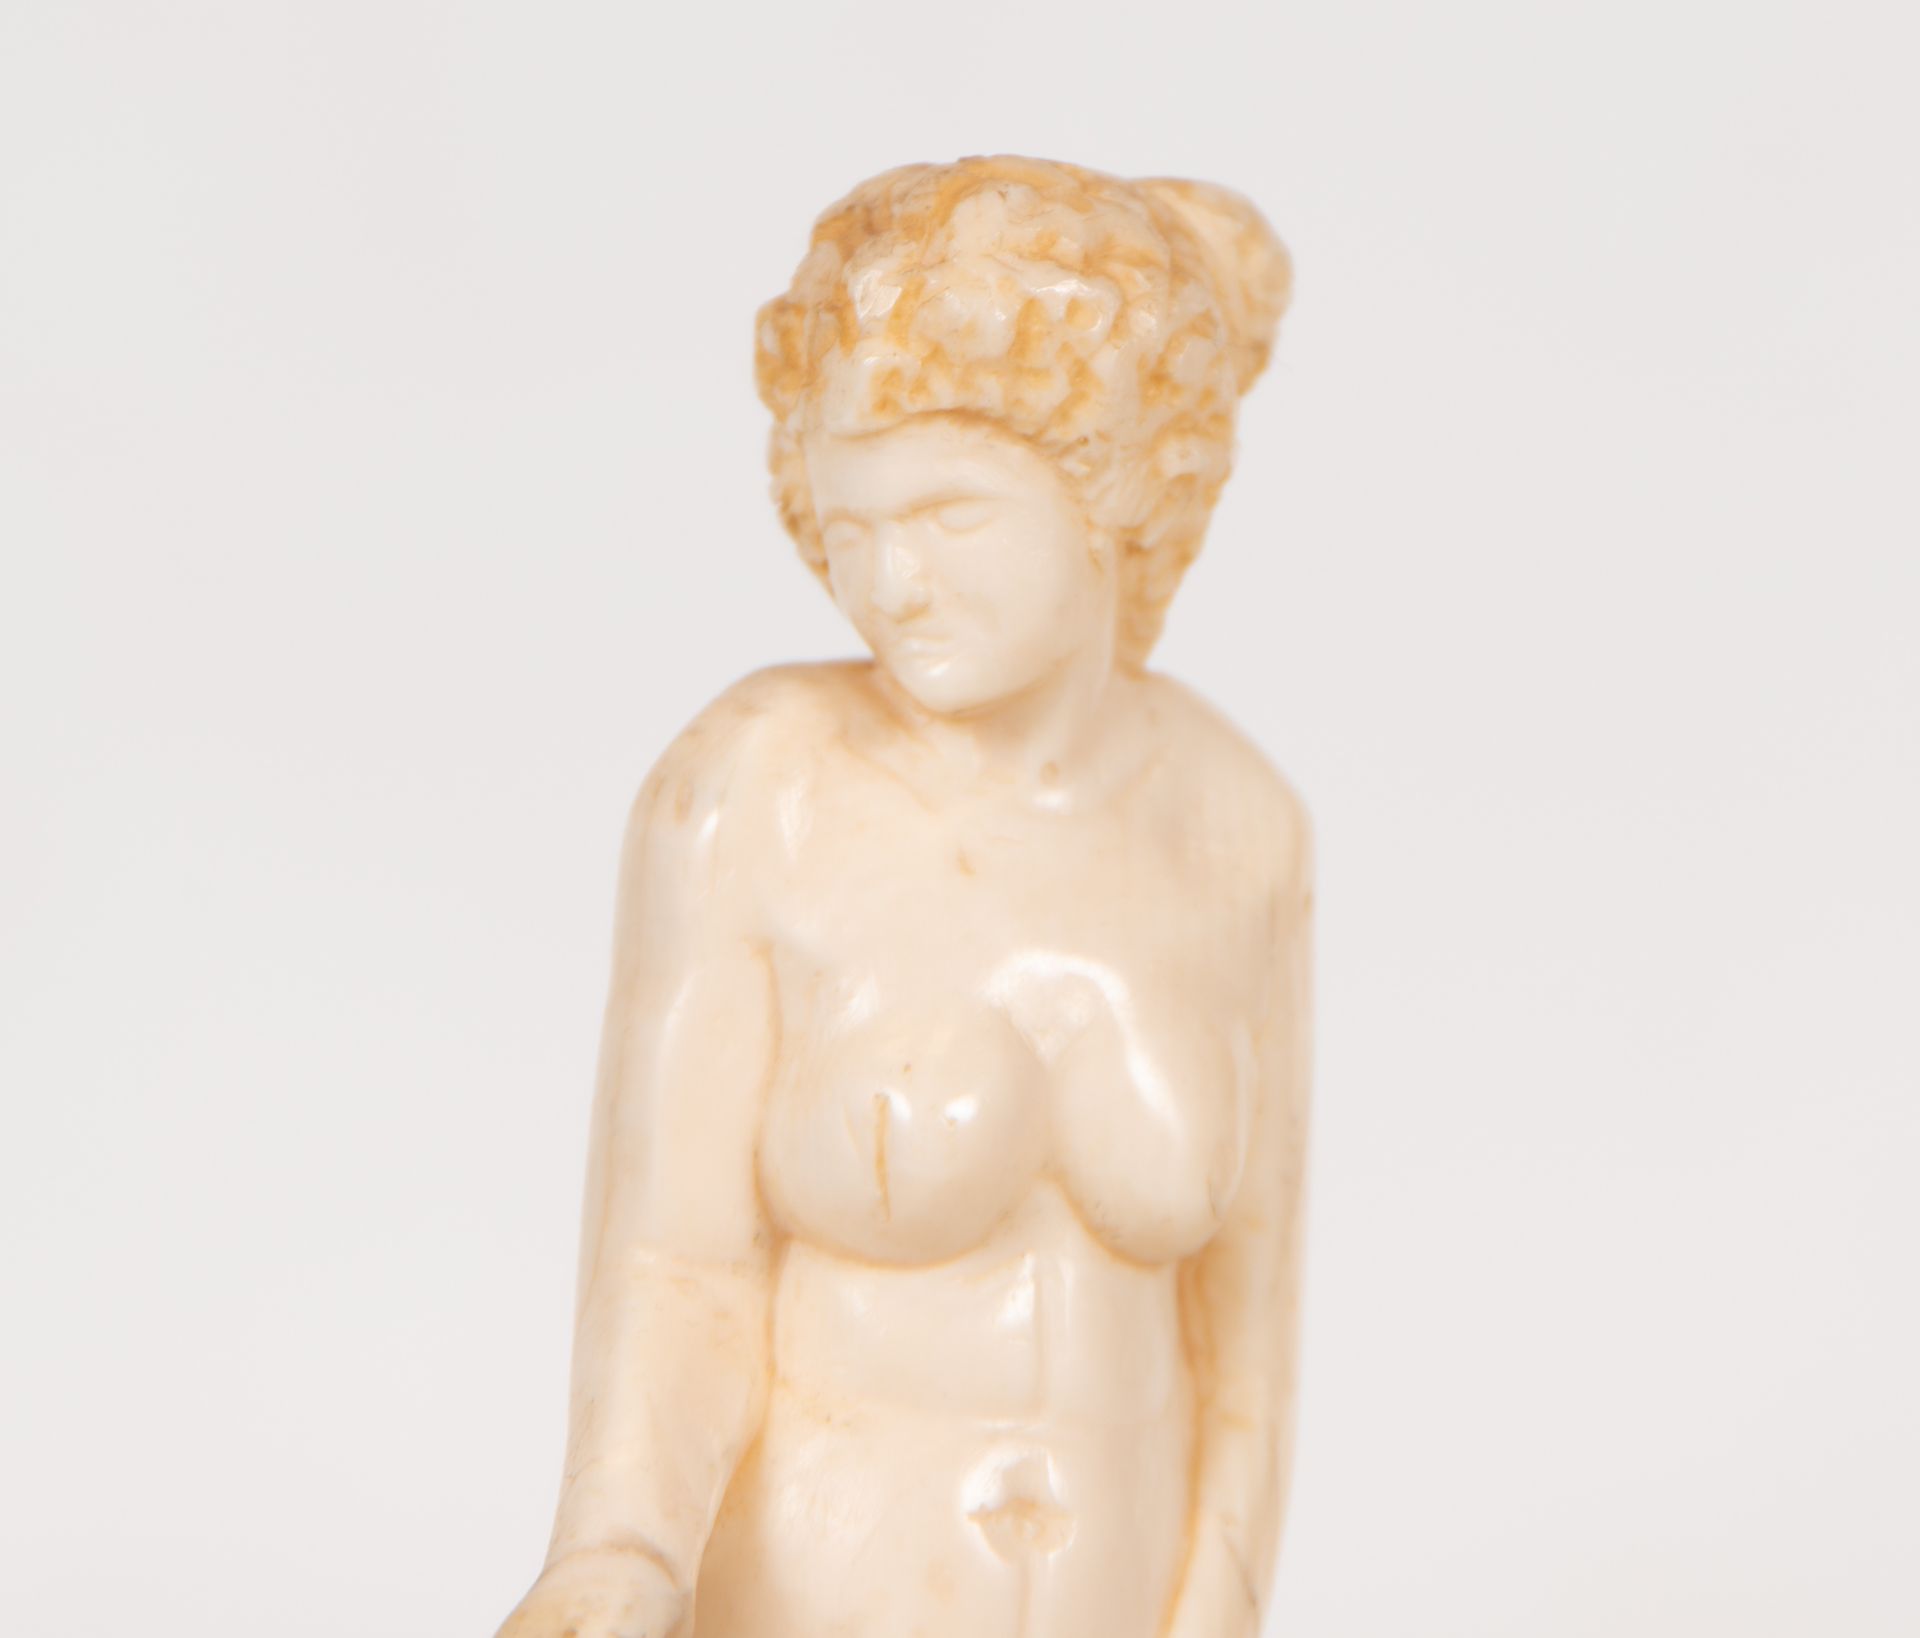 Aphrodite in Ivory, 17th century Flemish work - Image 5 of 9